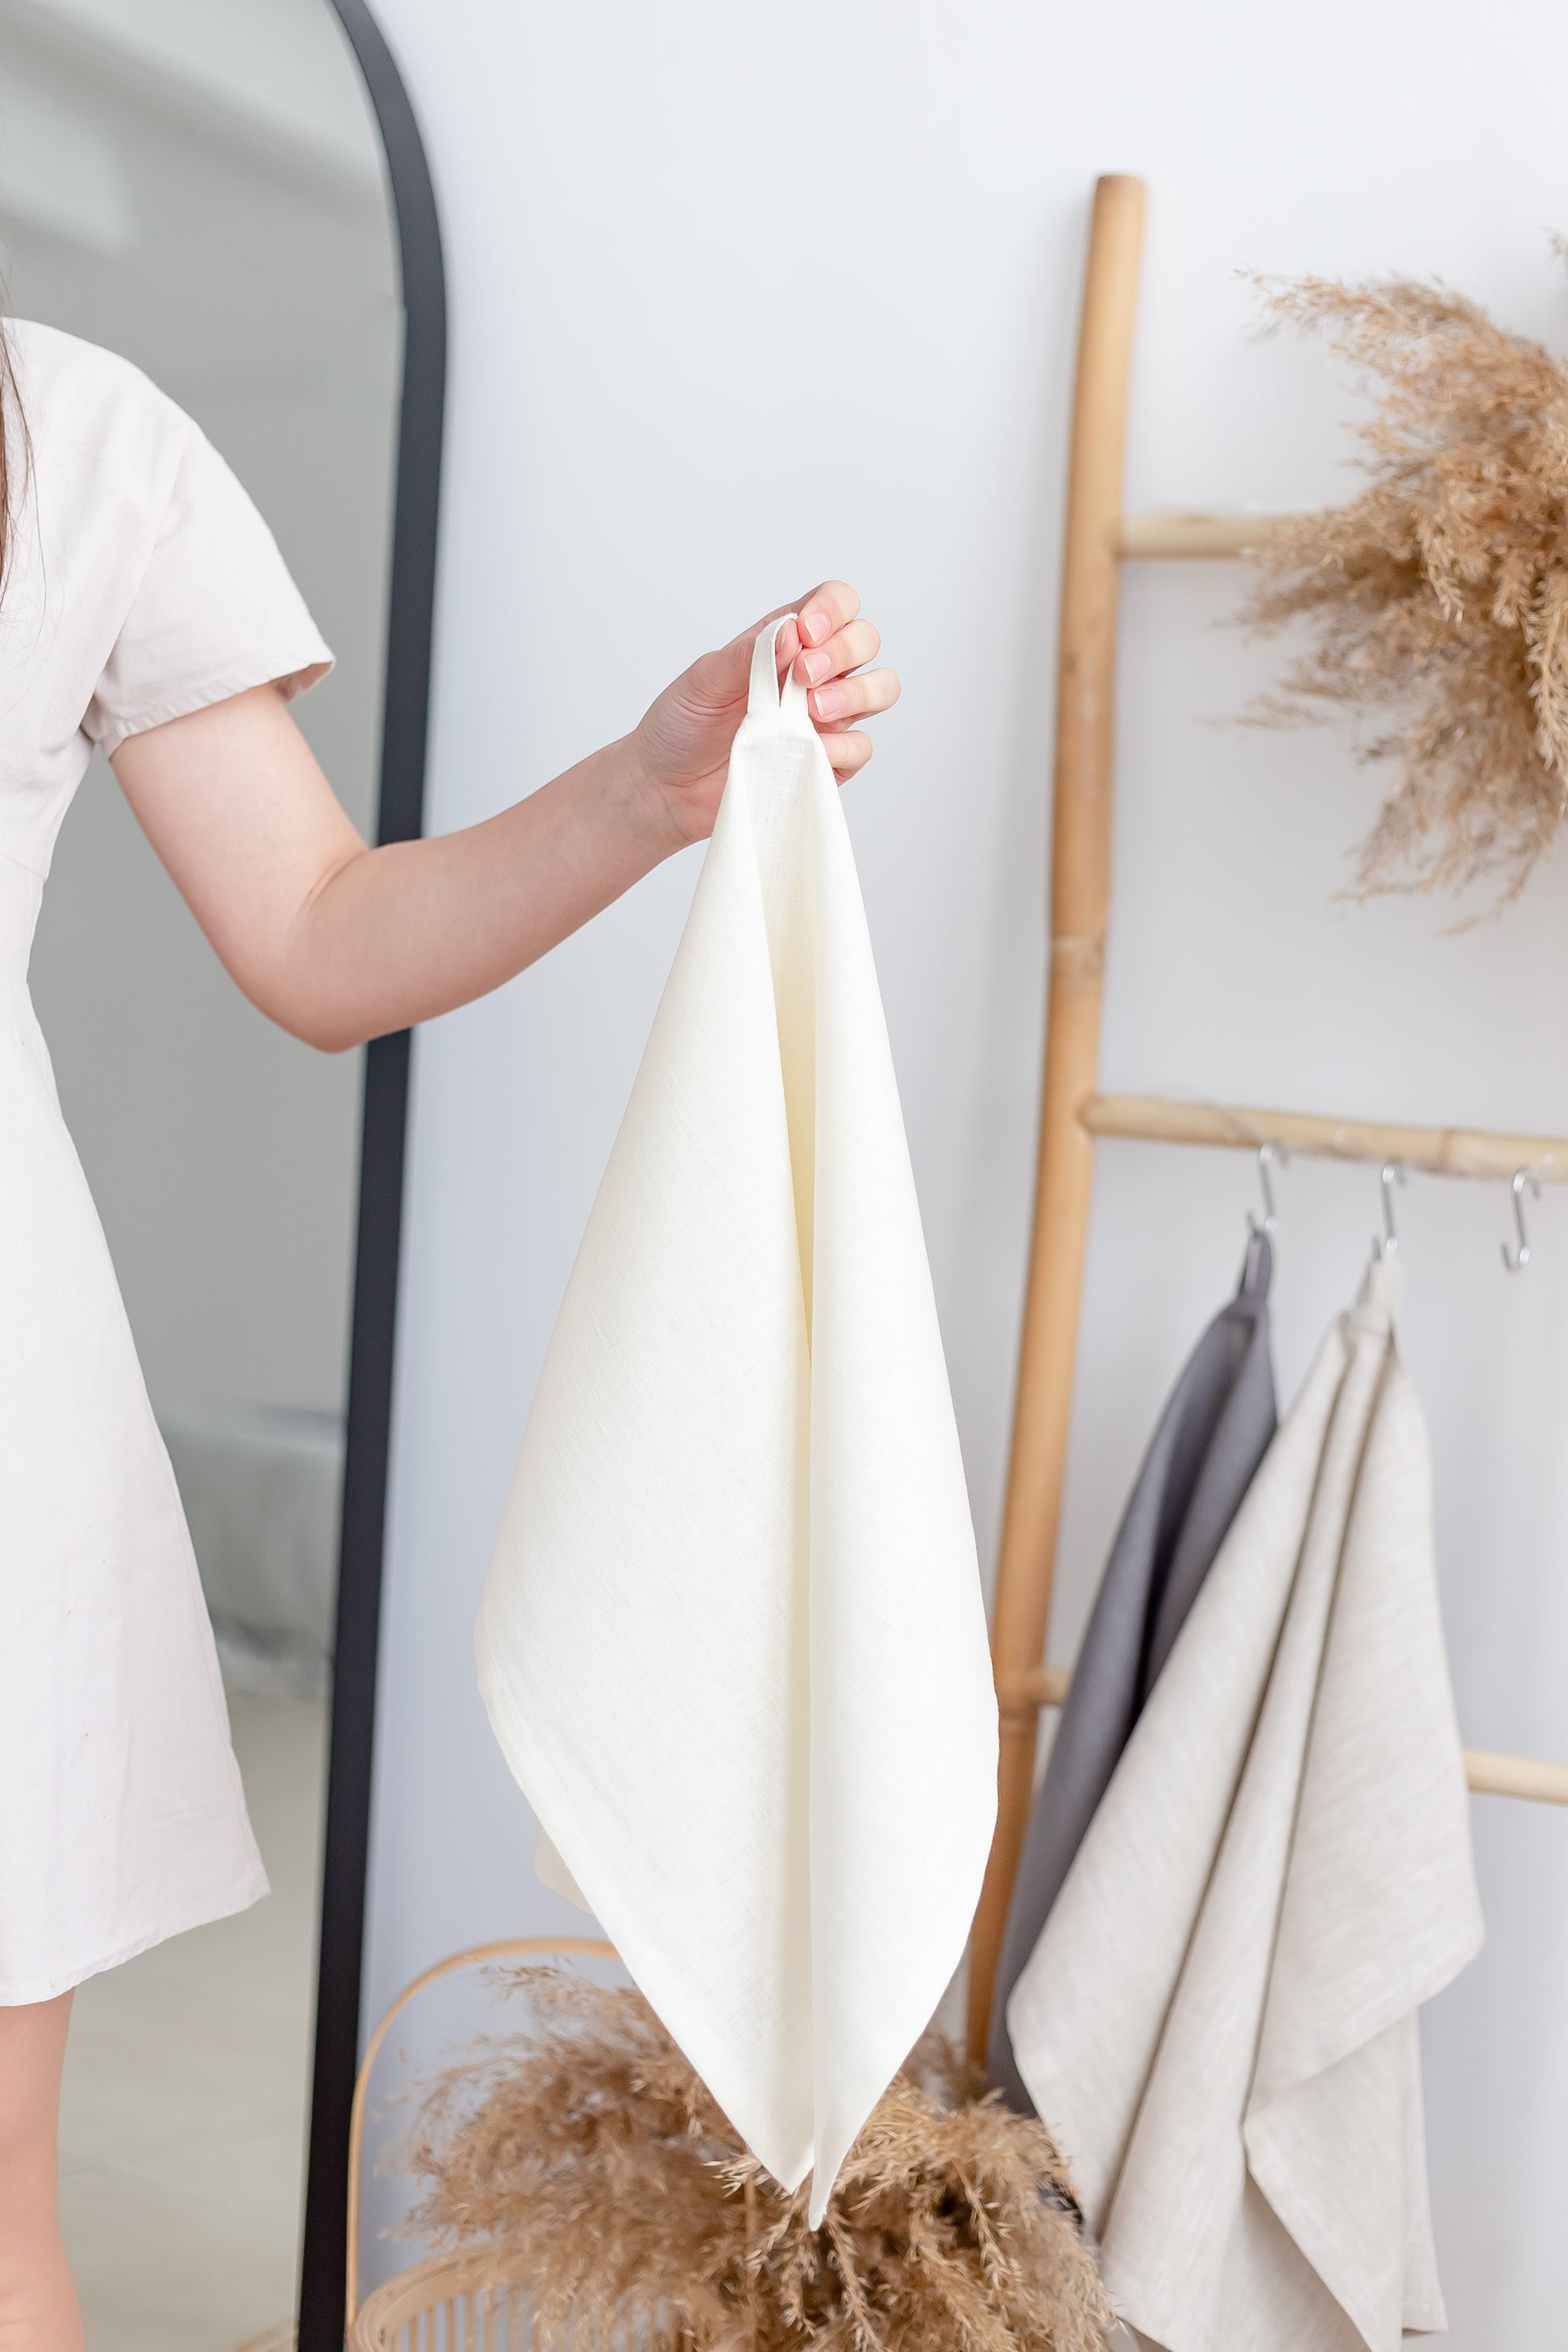 Eggshell white washed linen hand towel